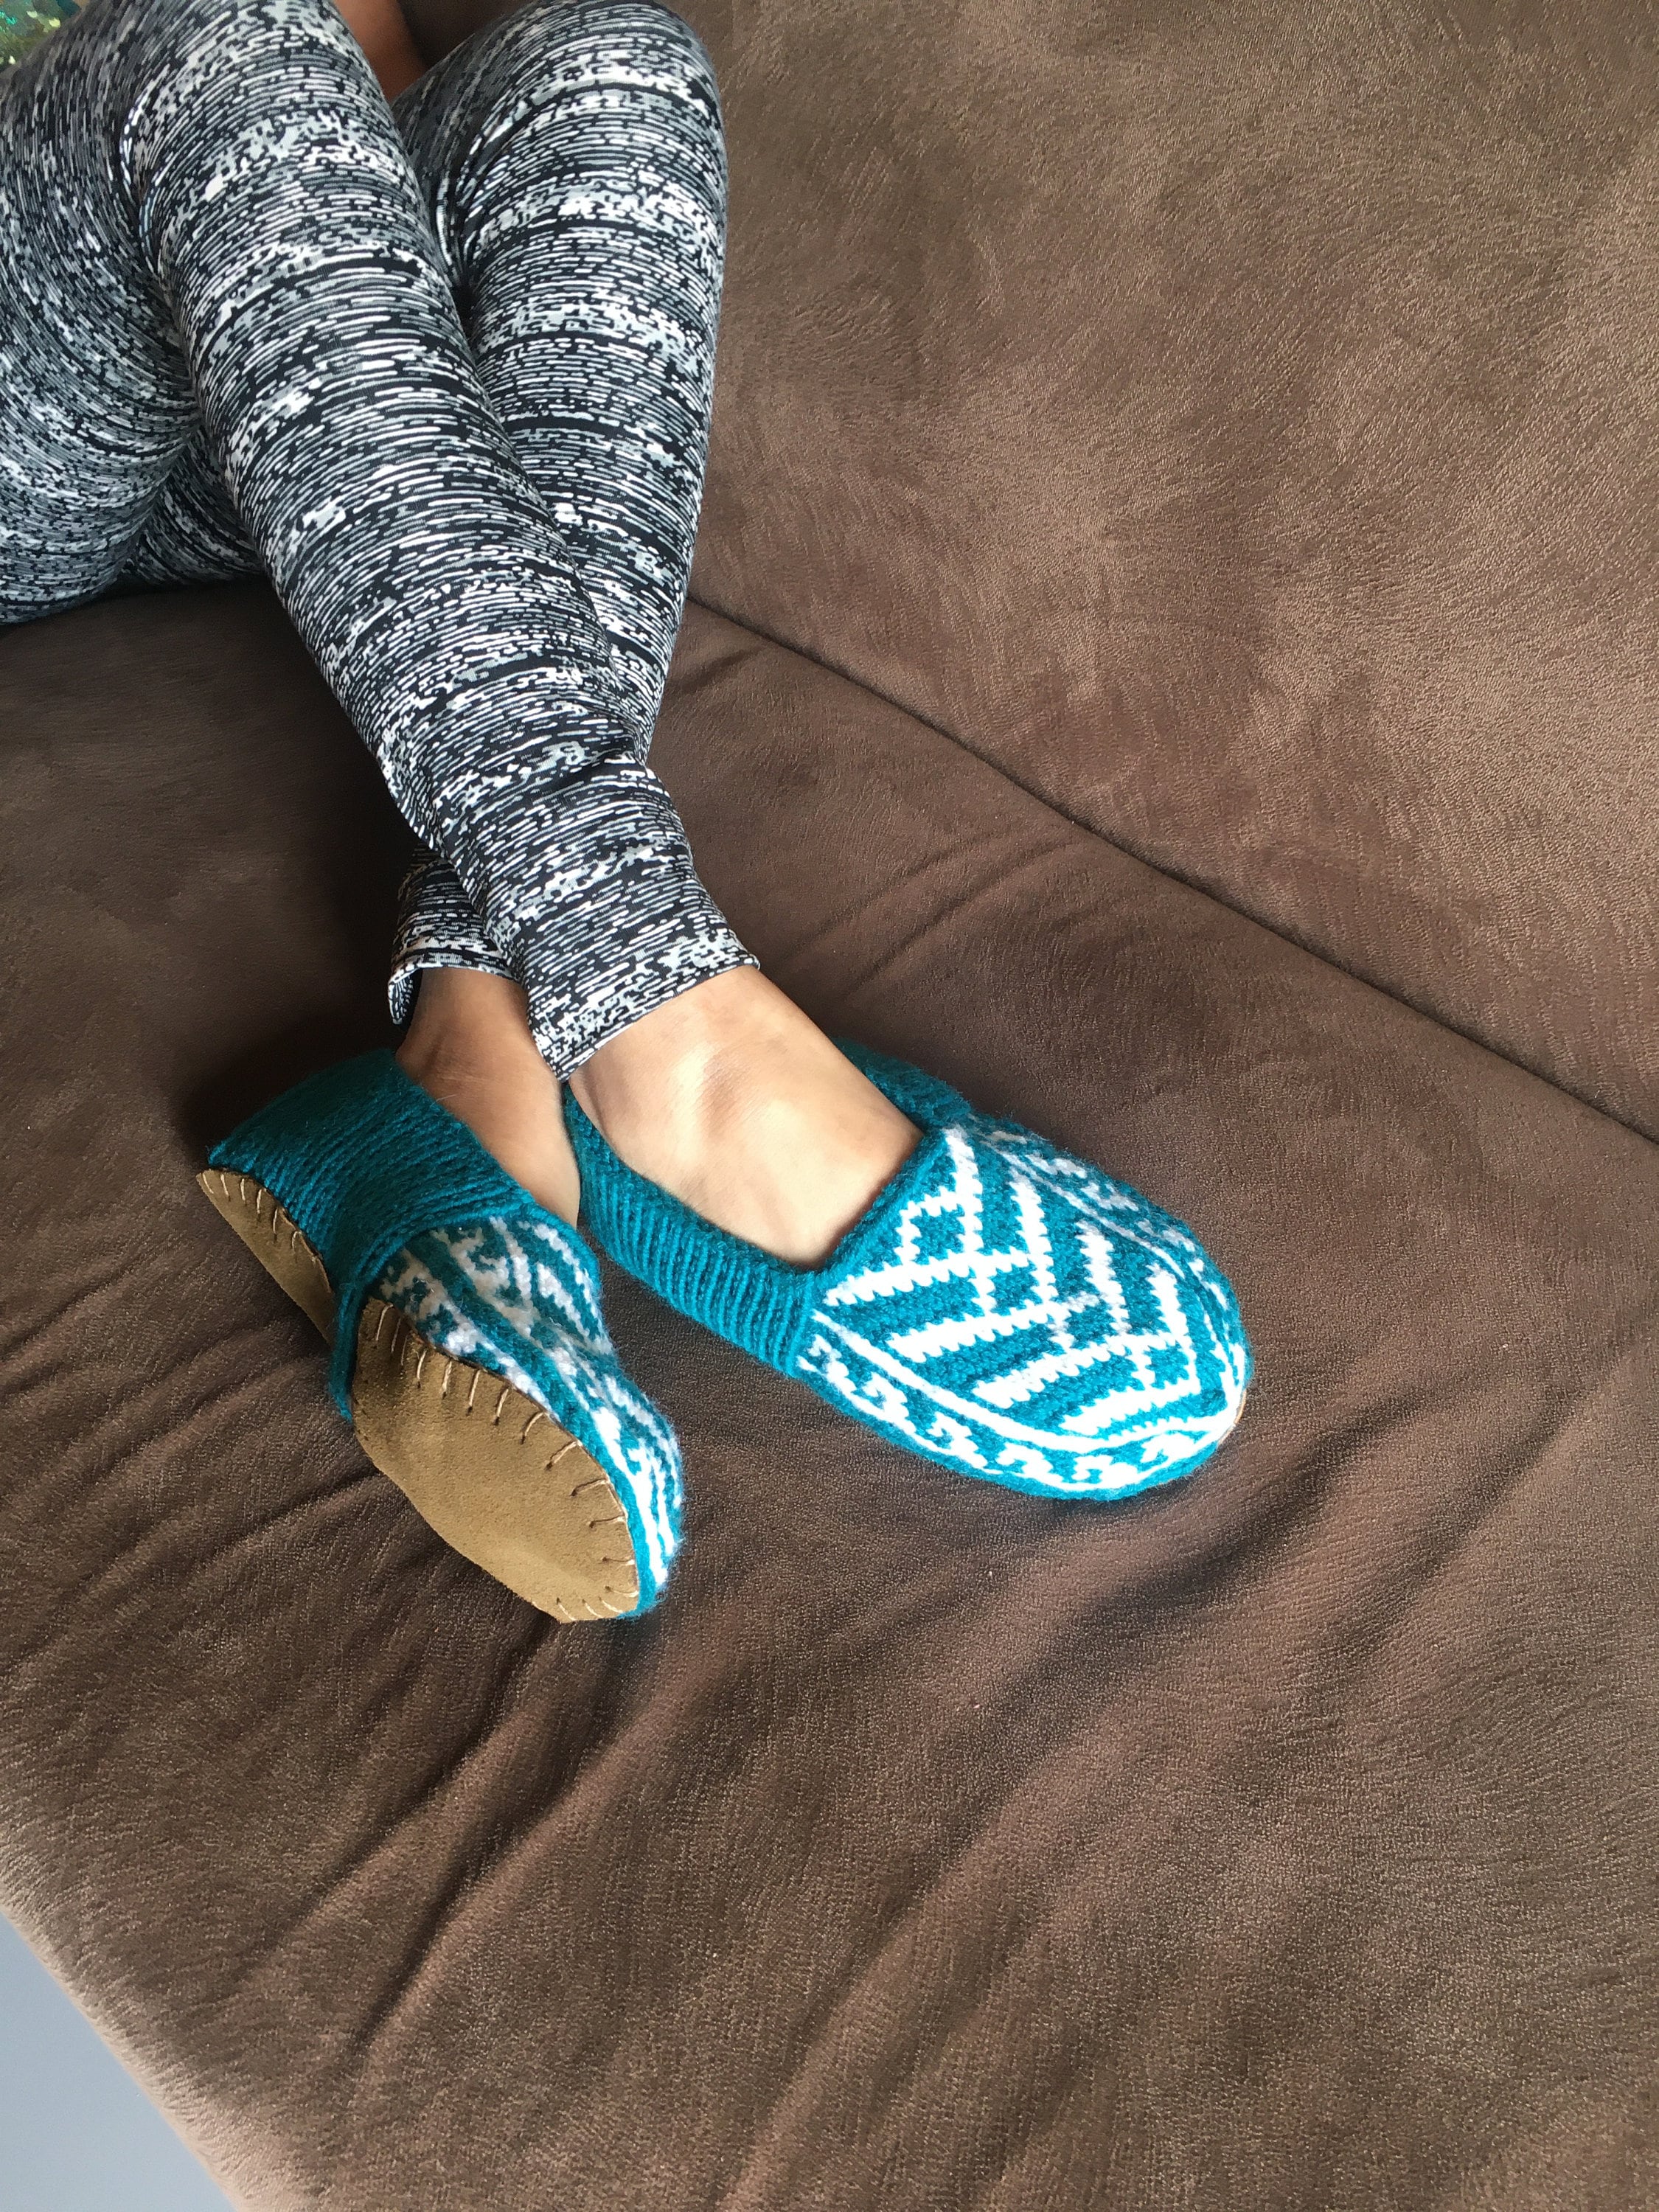 Teal & White Women's 5-6 10 Slipper Socks WITH Suede - Etsy